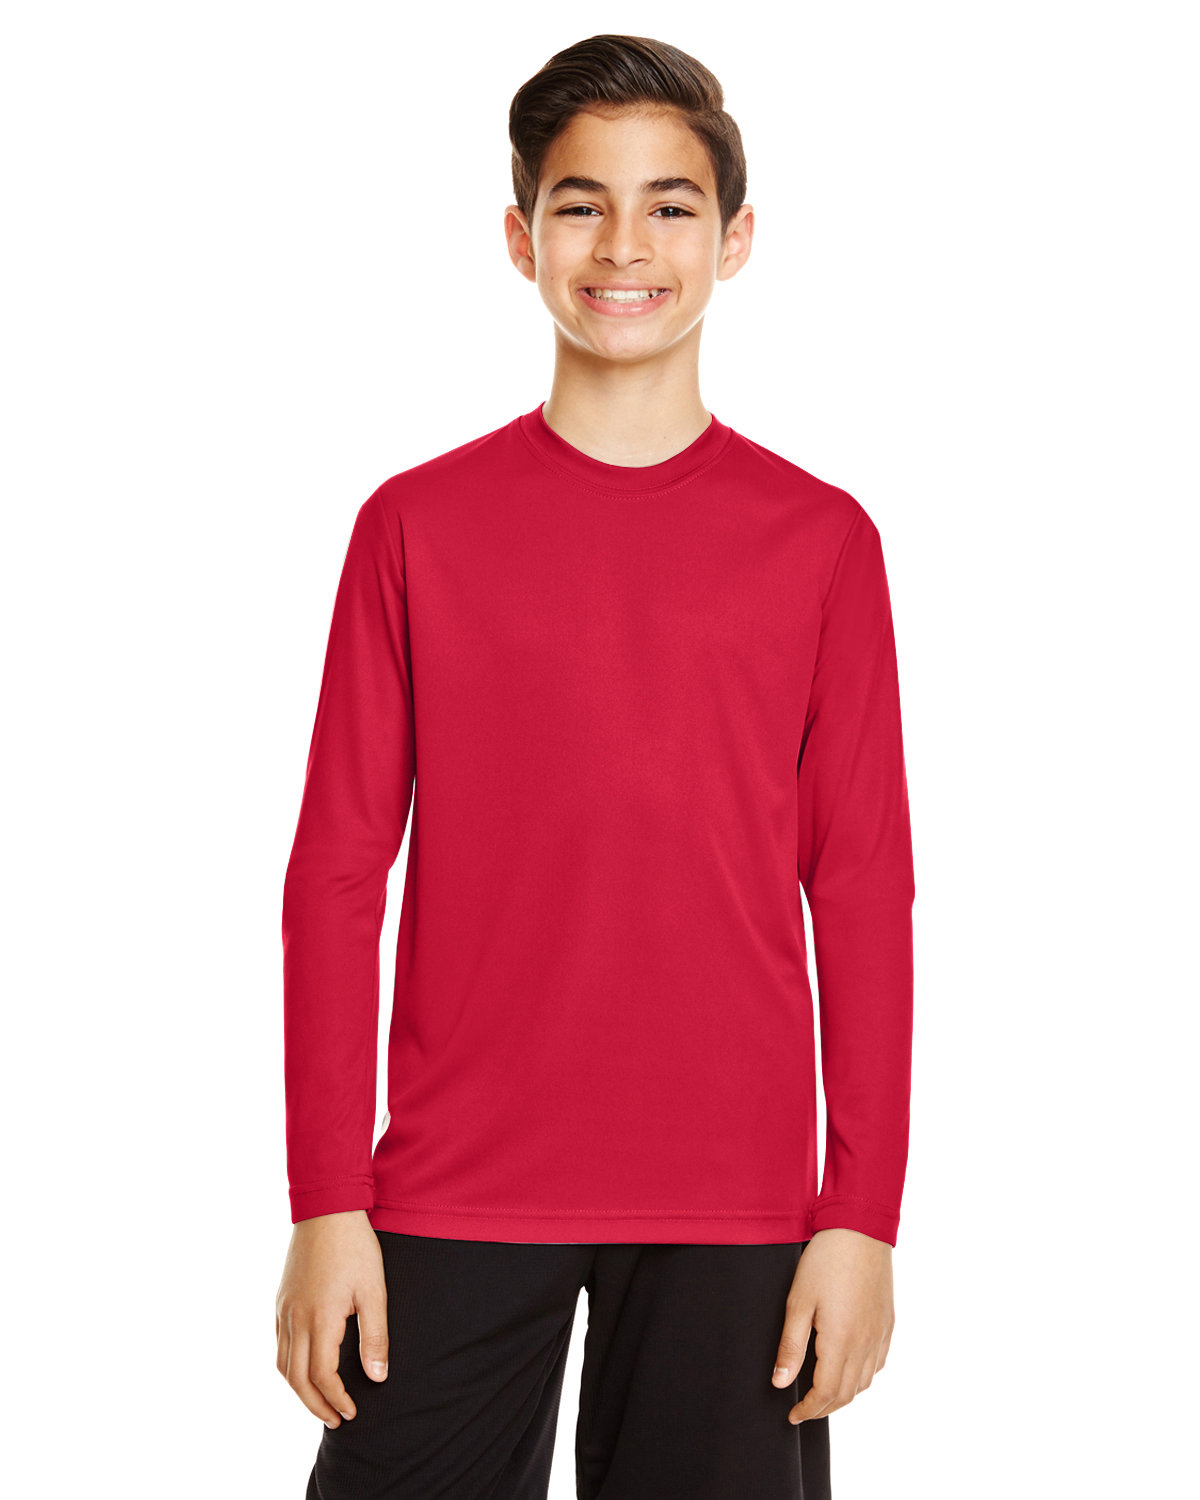 Team 365 Youth Zone Performance Long-Sleeve T-Shirt SPORT RED 